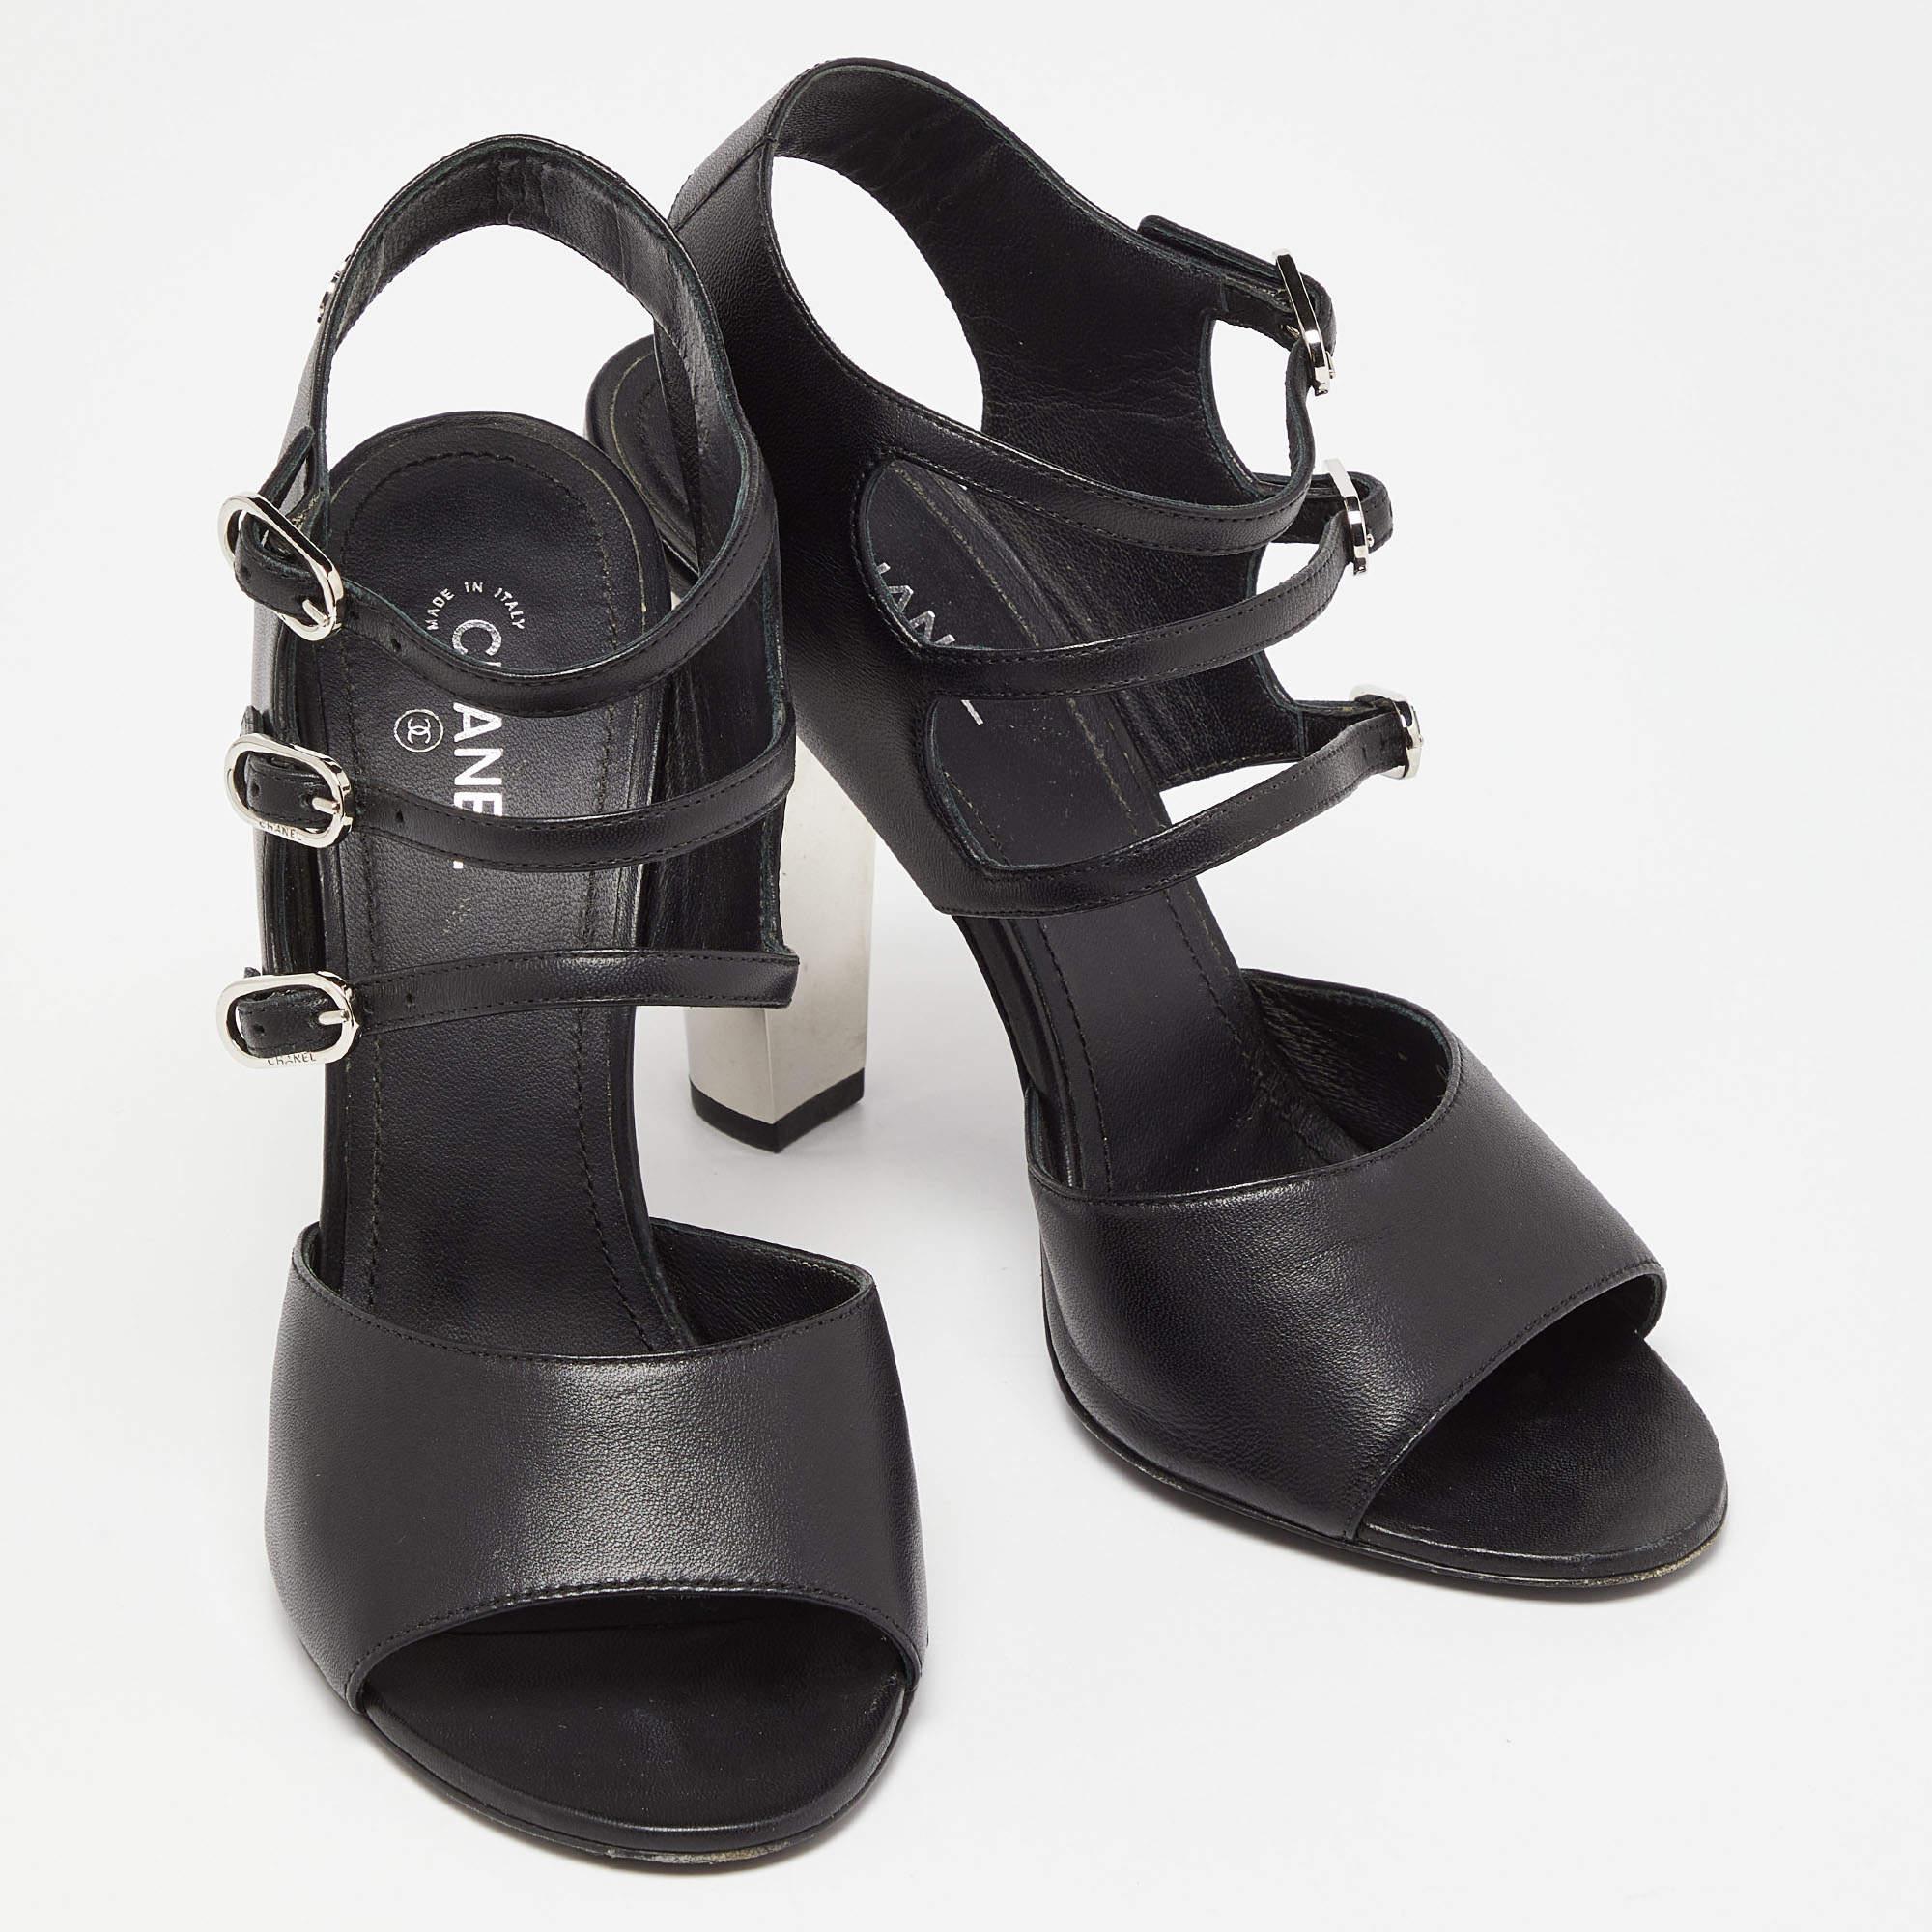 Chanel Black Leather Strappy Buckle Sandals Size 39 1